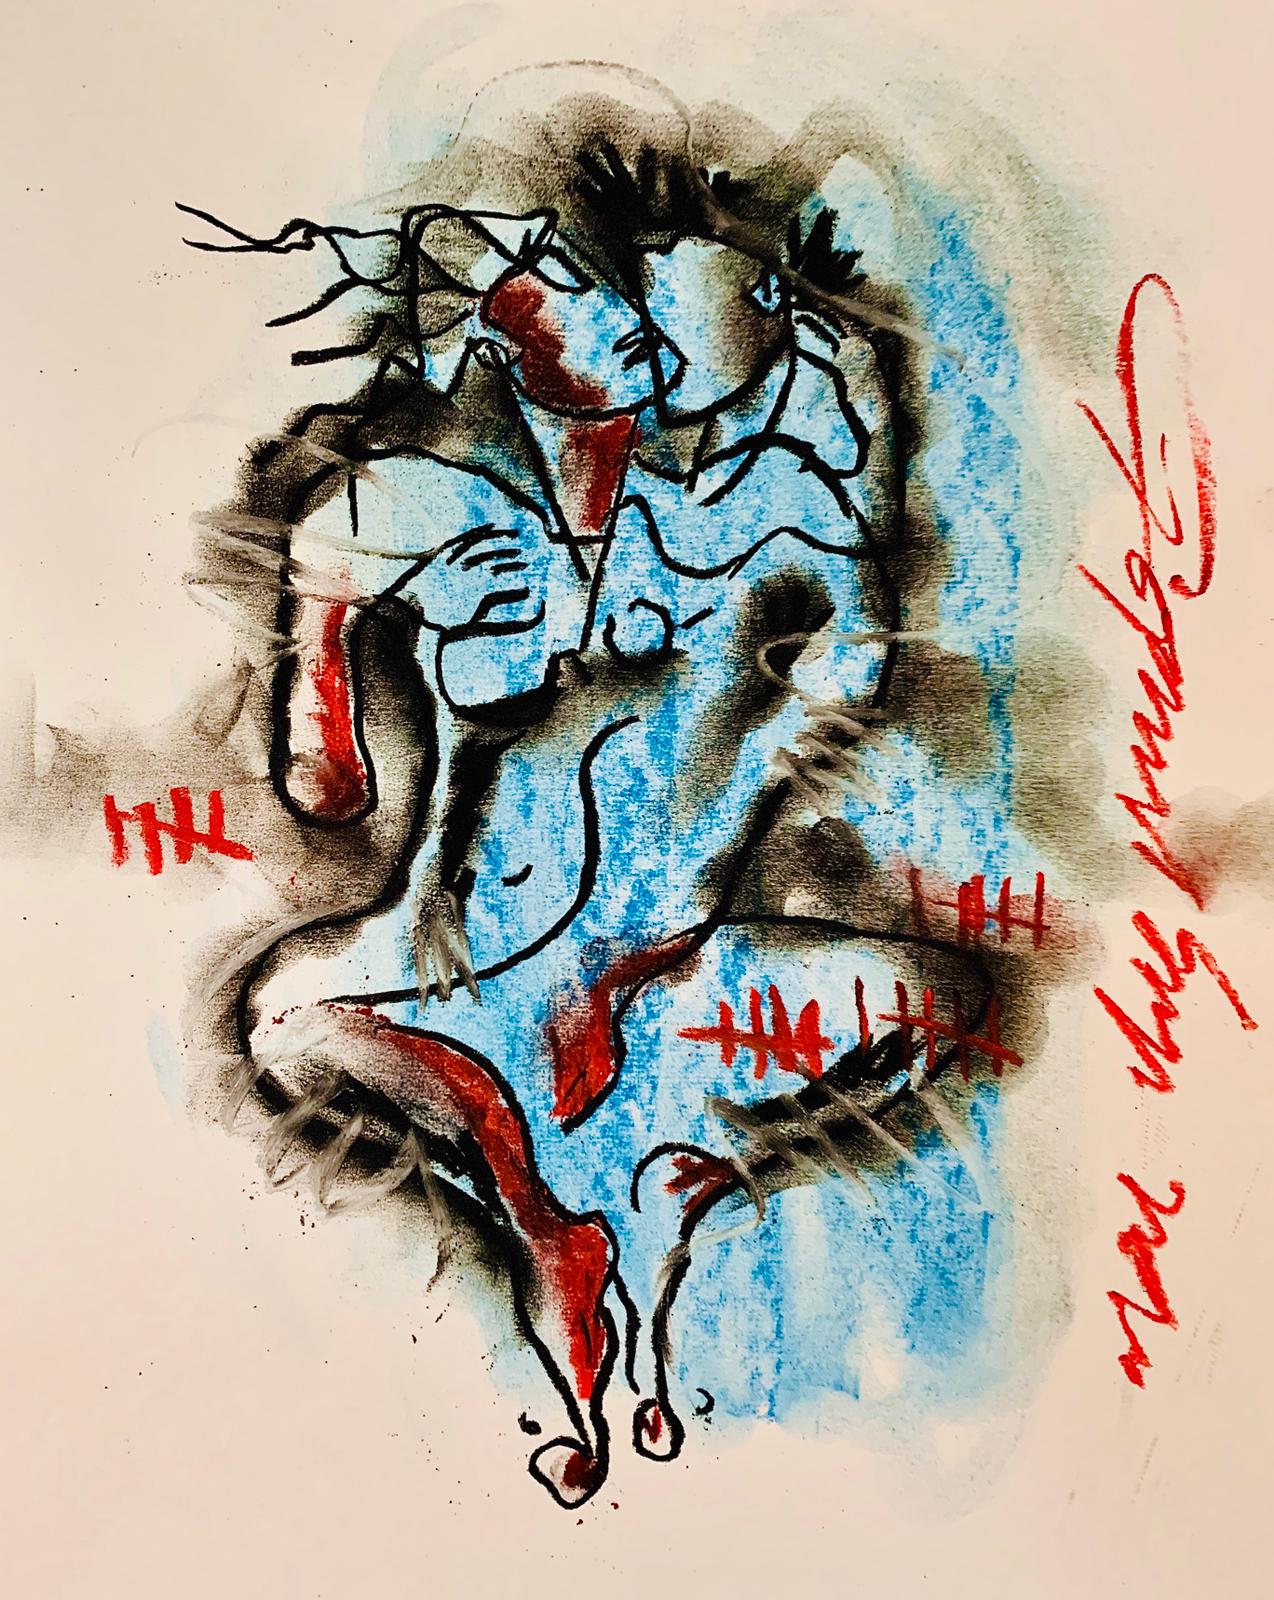 Buy Union Painting the original Matted Charcoal and Pastel on Paper artwork by Indian-American artist Gopaal Seyn | RedBlueArts.com